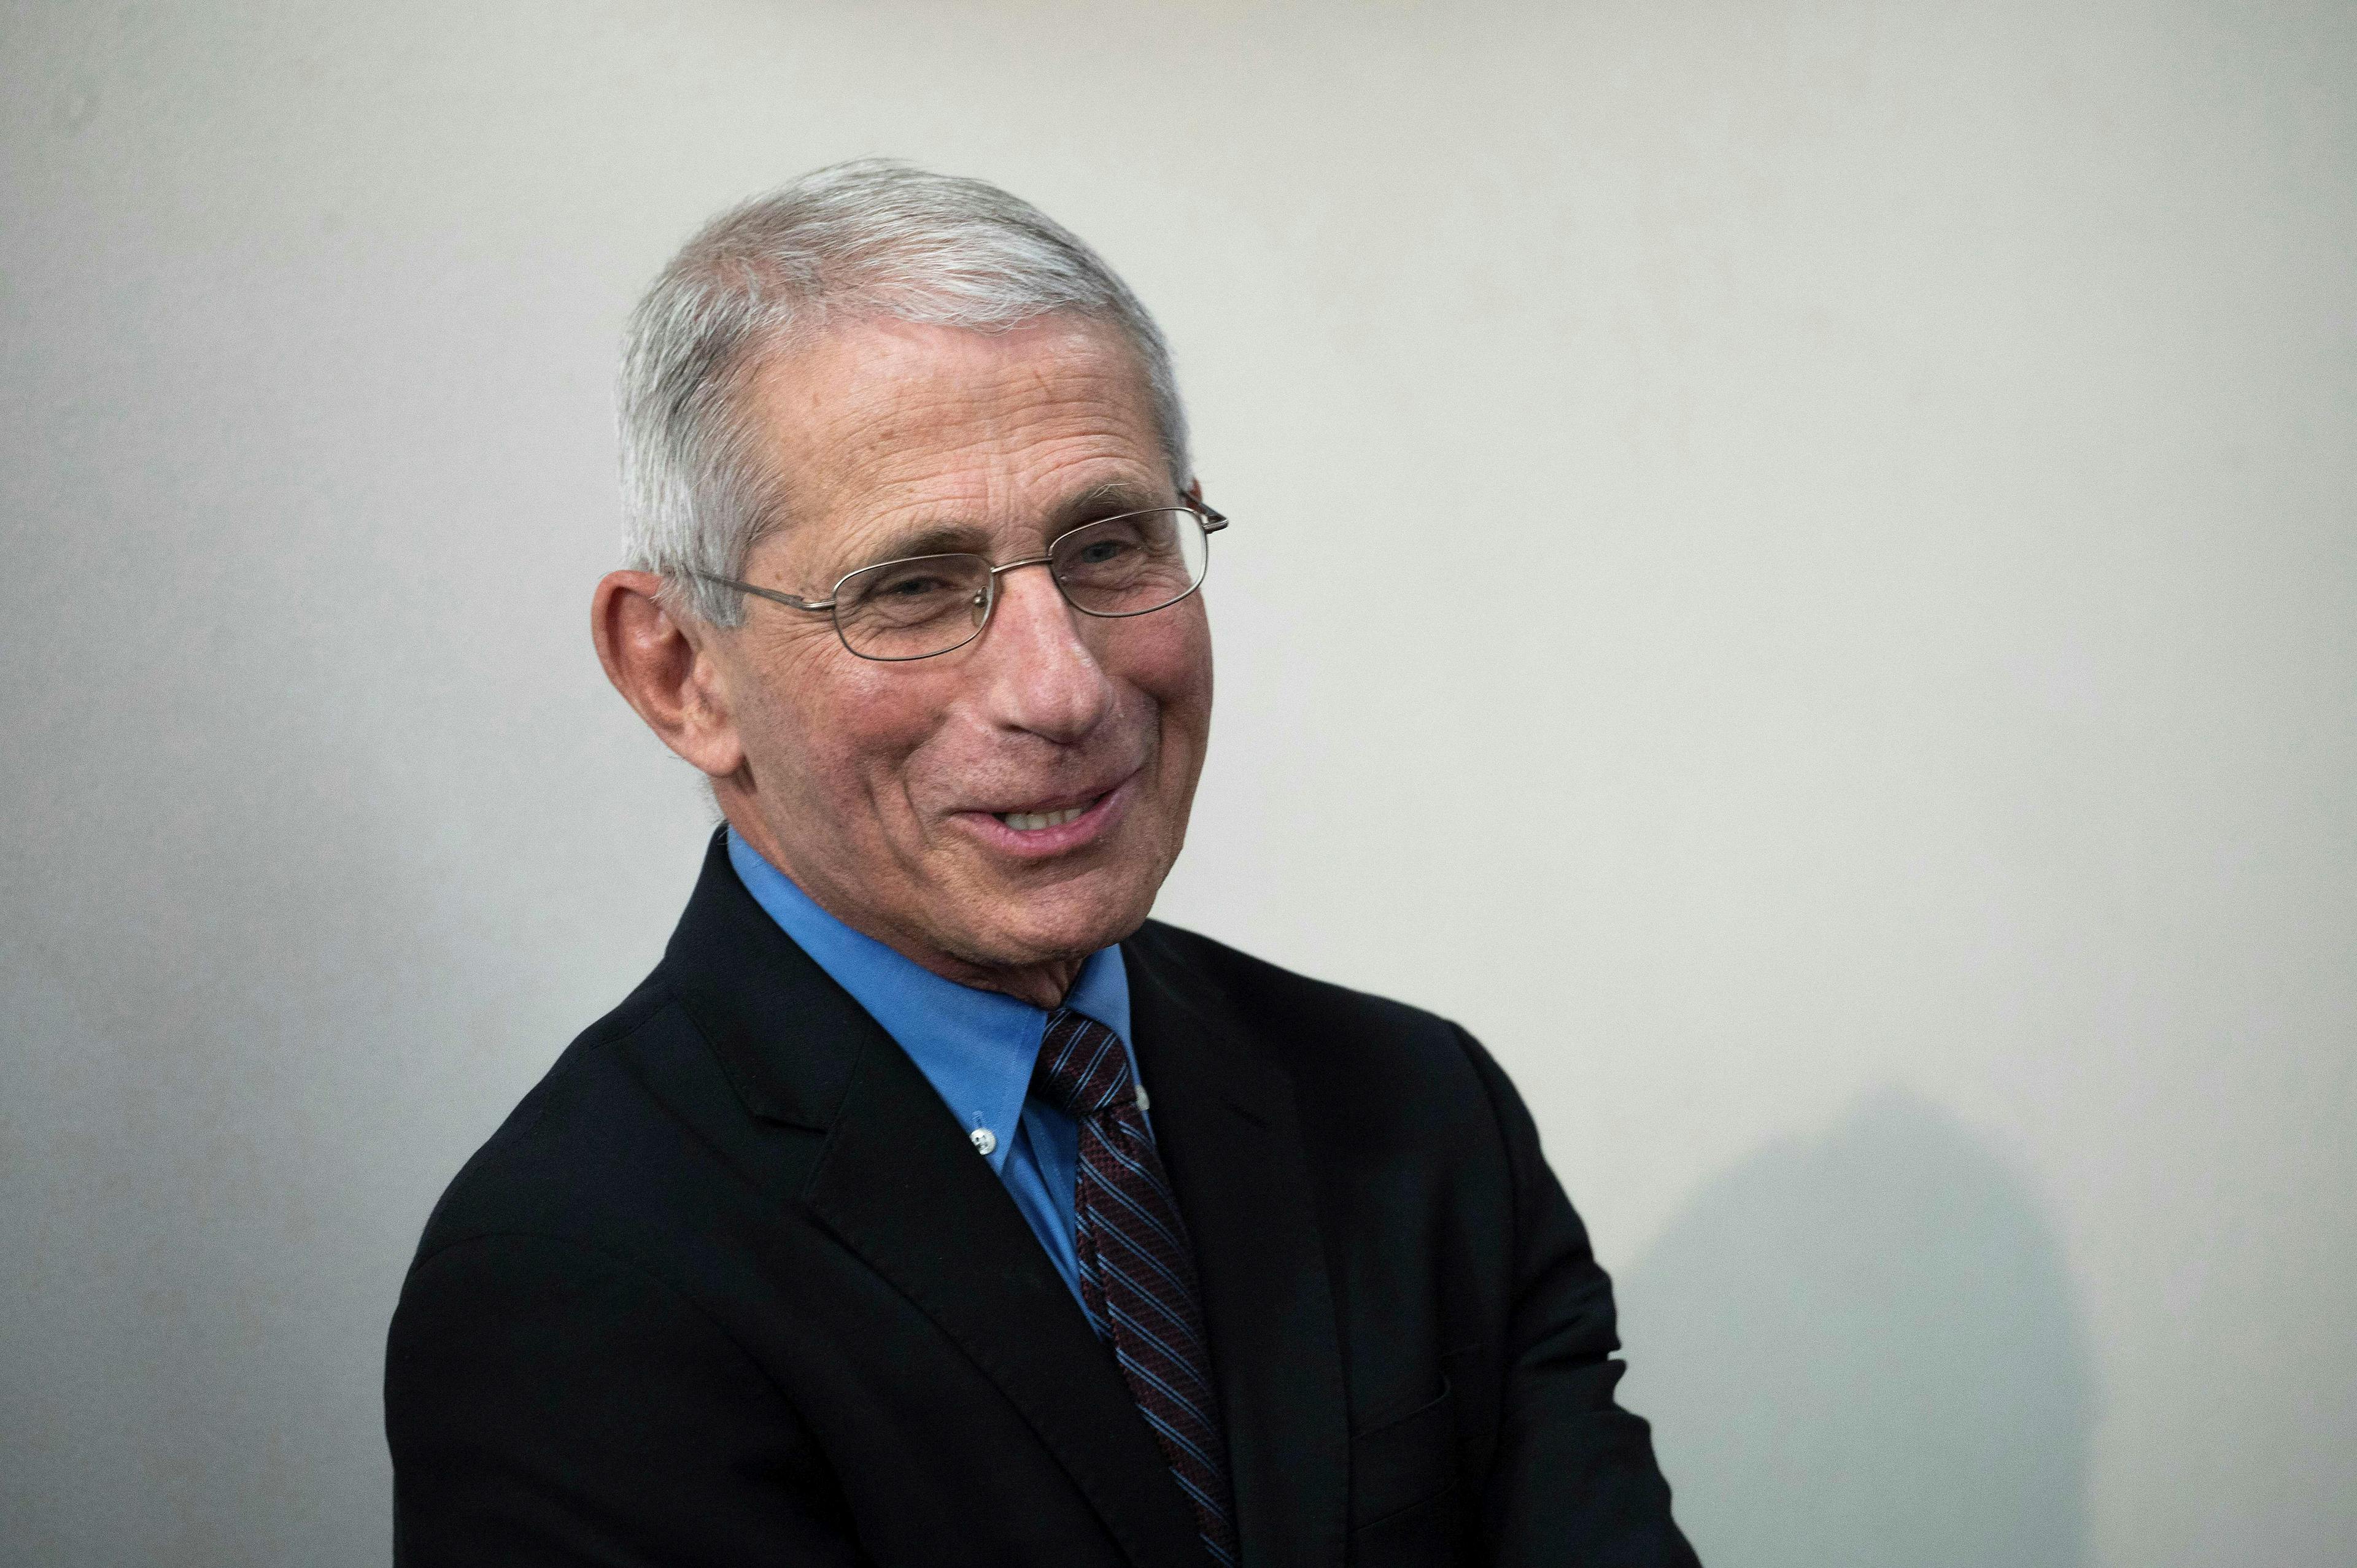 Dr. Anthony Fauci, director of the NIAID